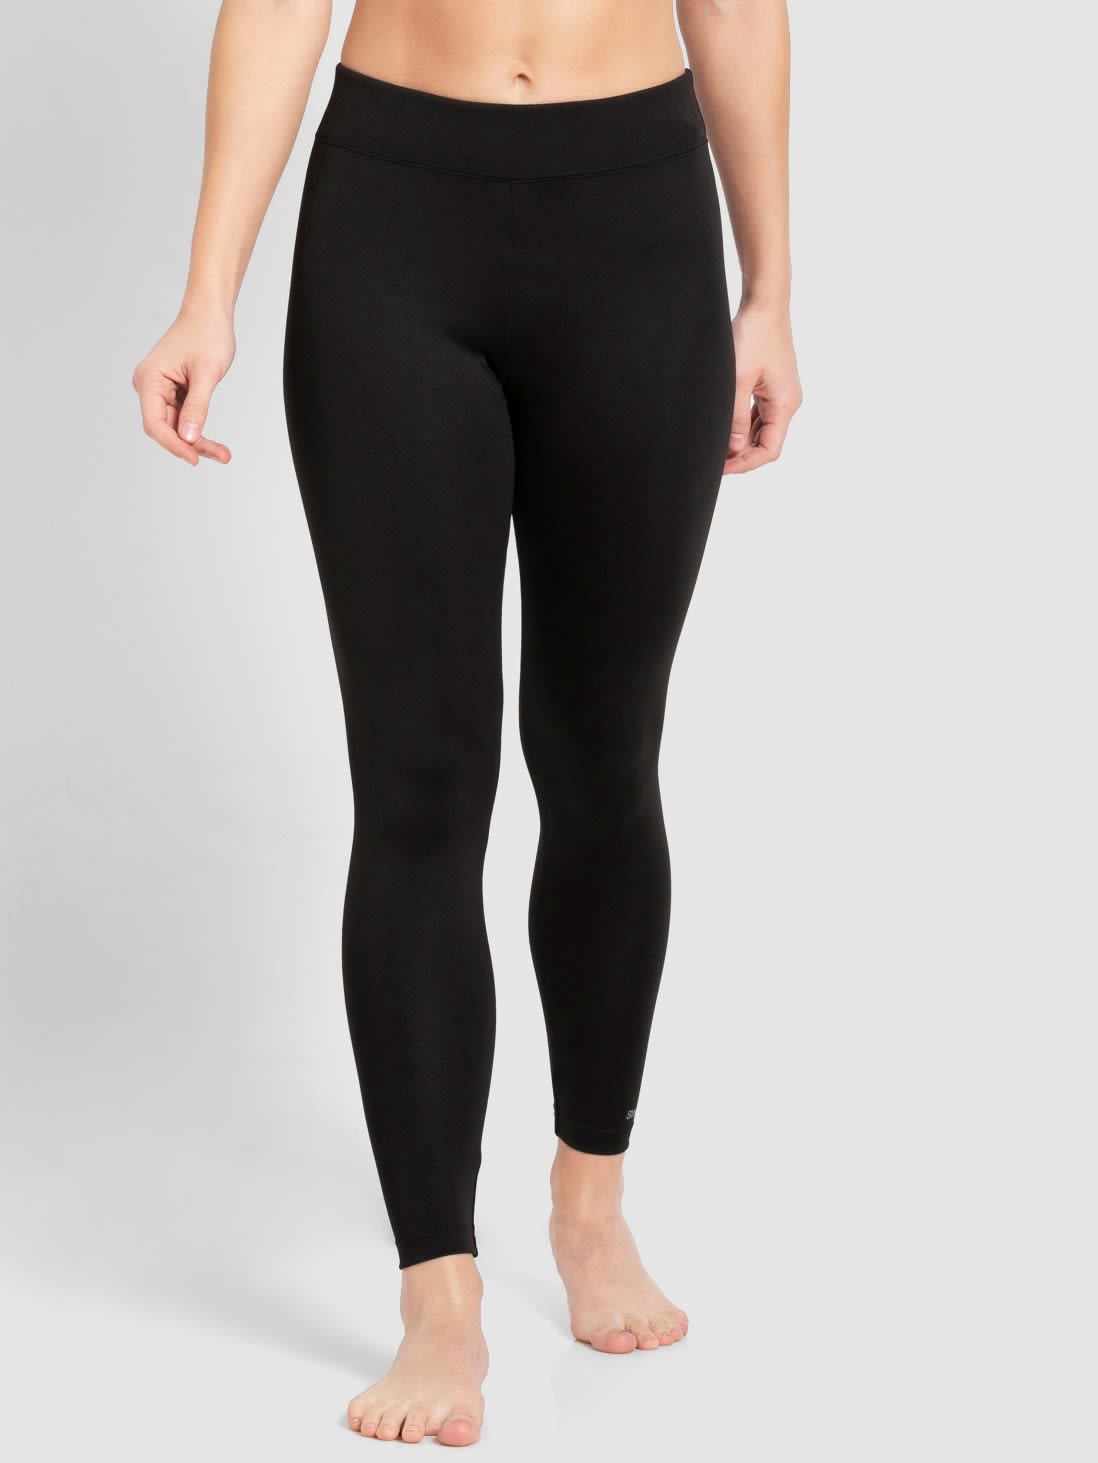 Jockey Women Apparel Bottoms | Snug Fit Solid Color Leggings without Pocket  & Elasticated Waistband - Black